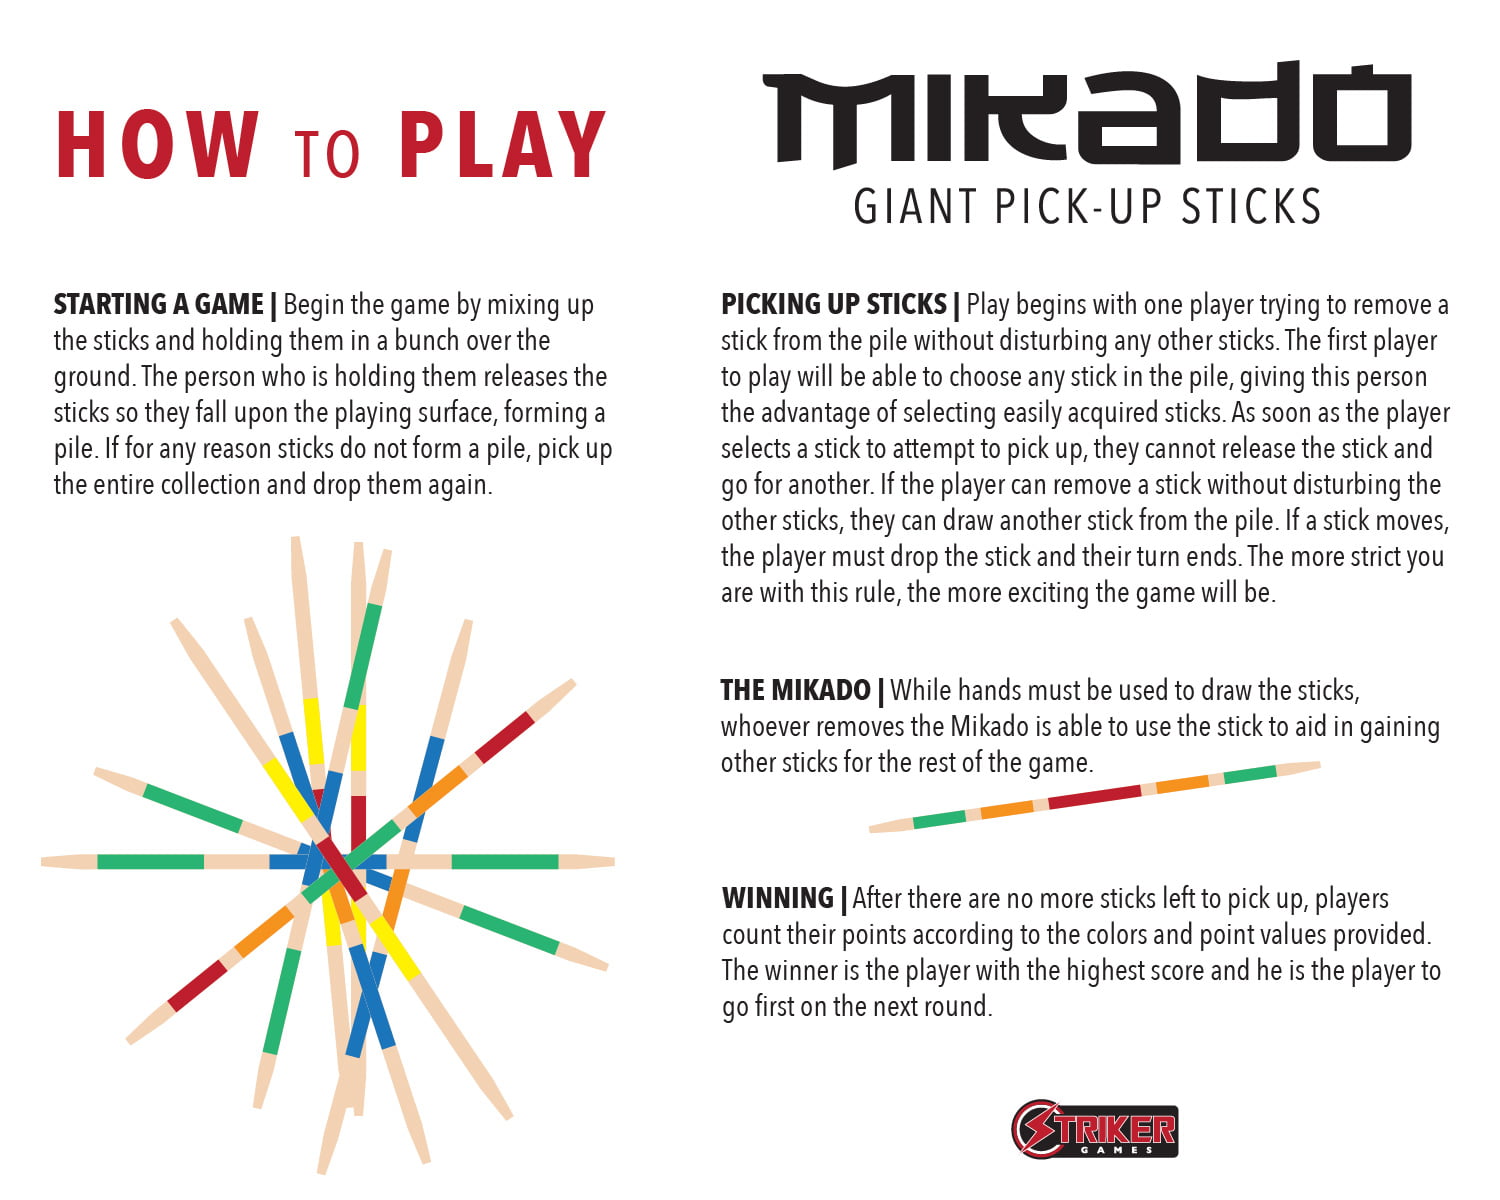 Giant Outdoor Games//Outdoor Toys Mikado Giant Pick-Up Sticks 35 Inch Wooden Sticks Factory Defect Striker Games